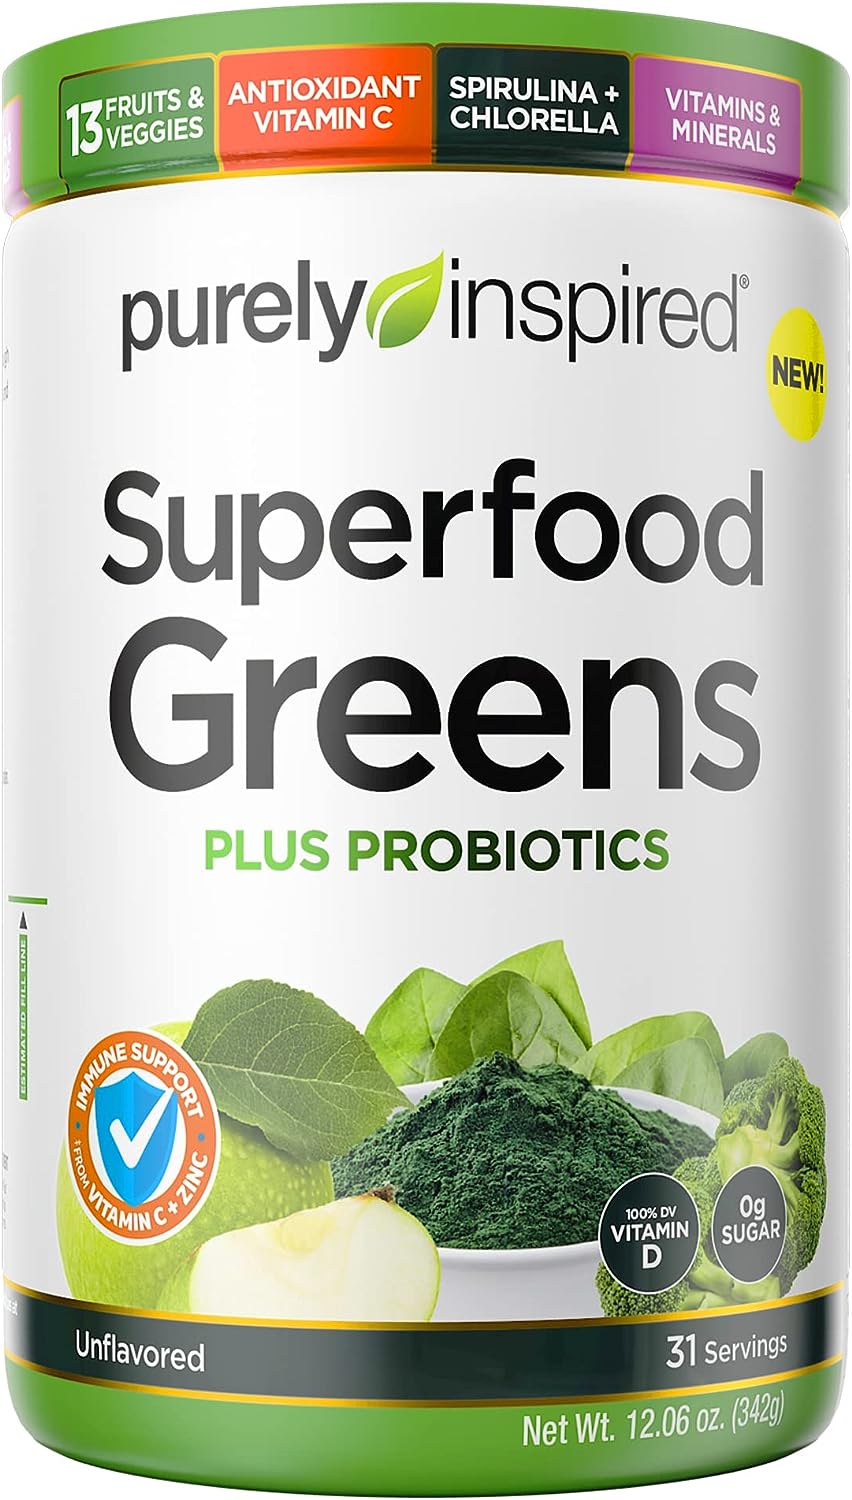 Greens Superfood Power Purely Inspired Superfood Greens Powder Vitamin C  Zinc for Immune Support + Vitamin D Smoothie Mix 13 Fruits  Vegetables 31 Servings